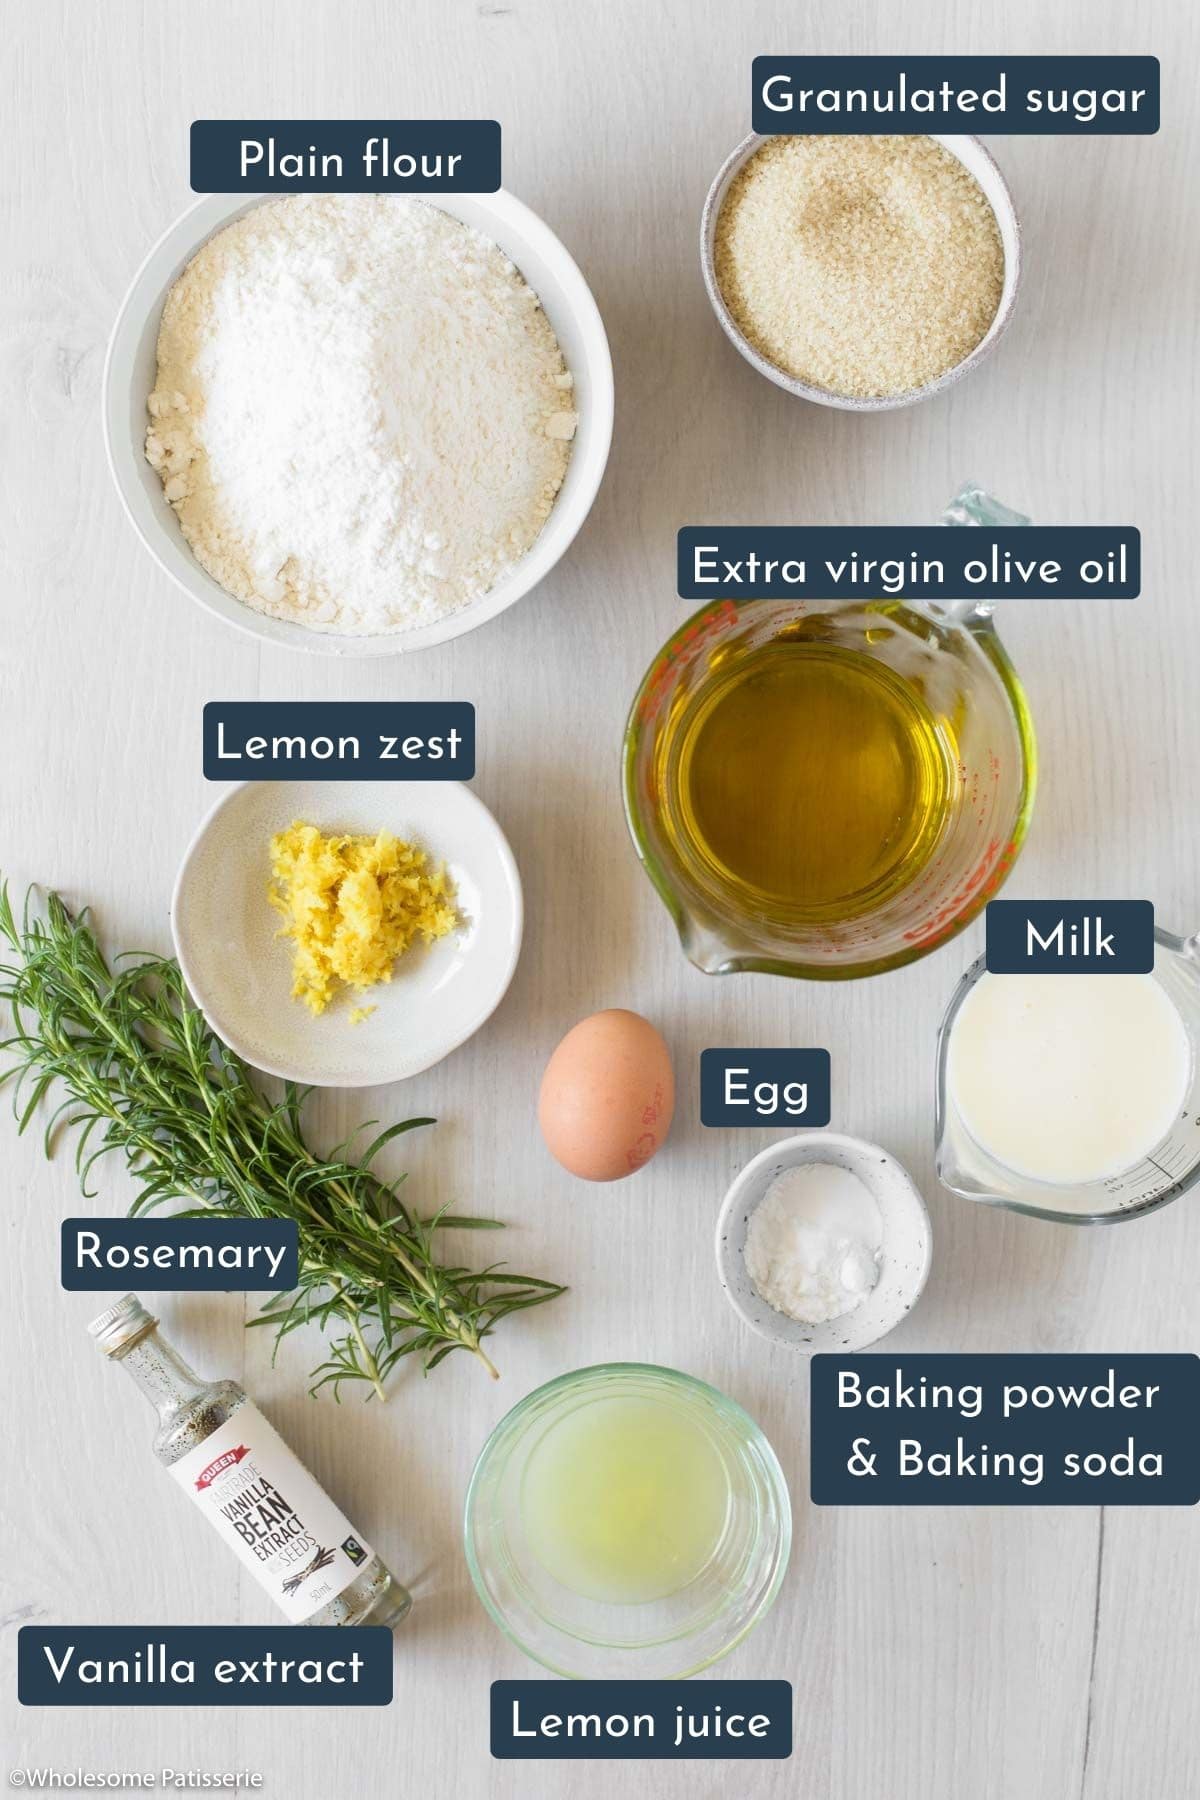 Ingredients needed to make this cake